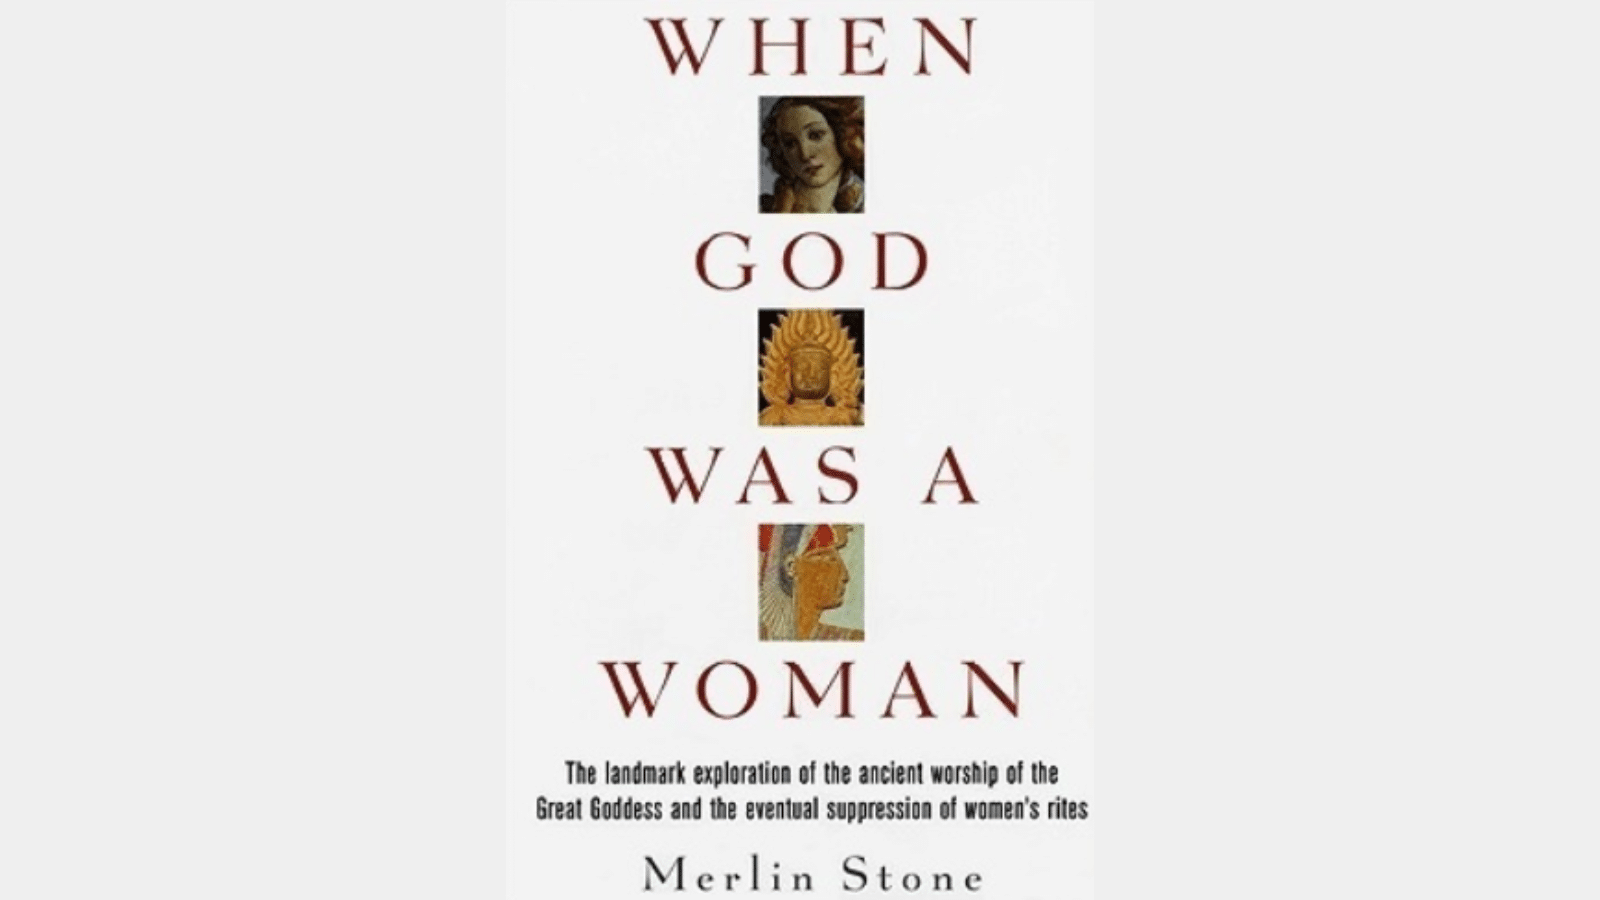 <p><span>This book allowed a reader to contemplate how much of history is erased due to patriarchy and colonialism. It’s a shame that patriarchal god mythology replaced goddess mythology. </span></p>